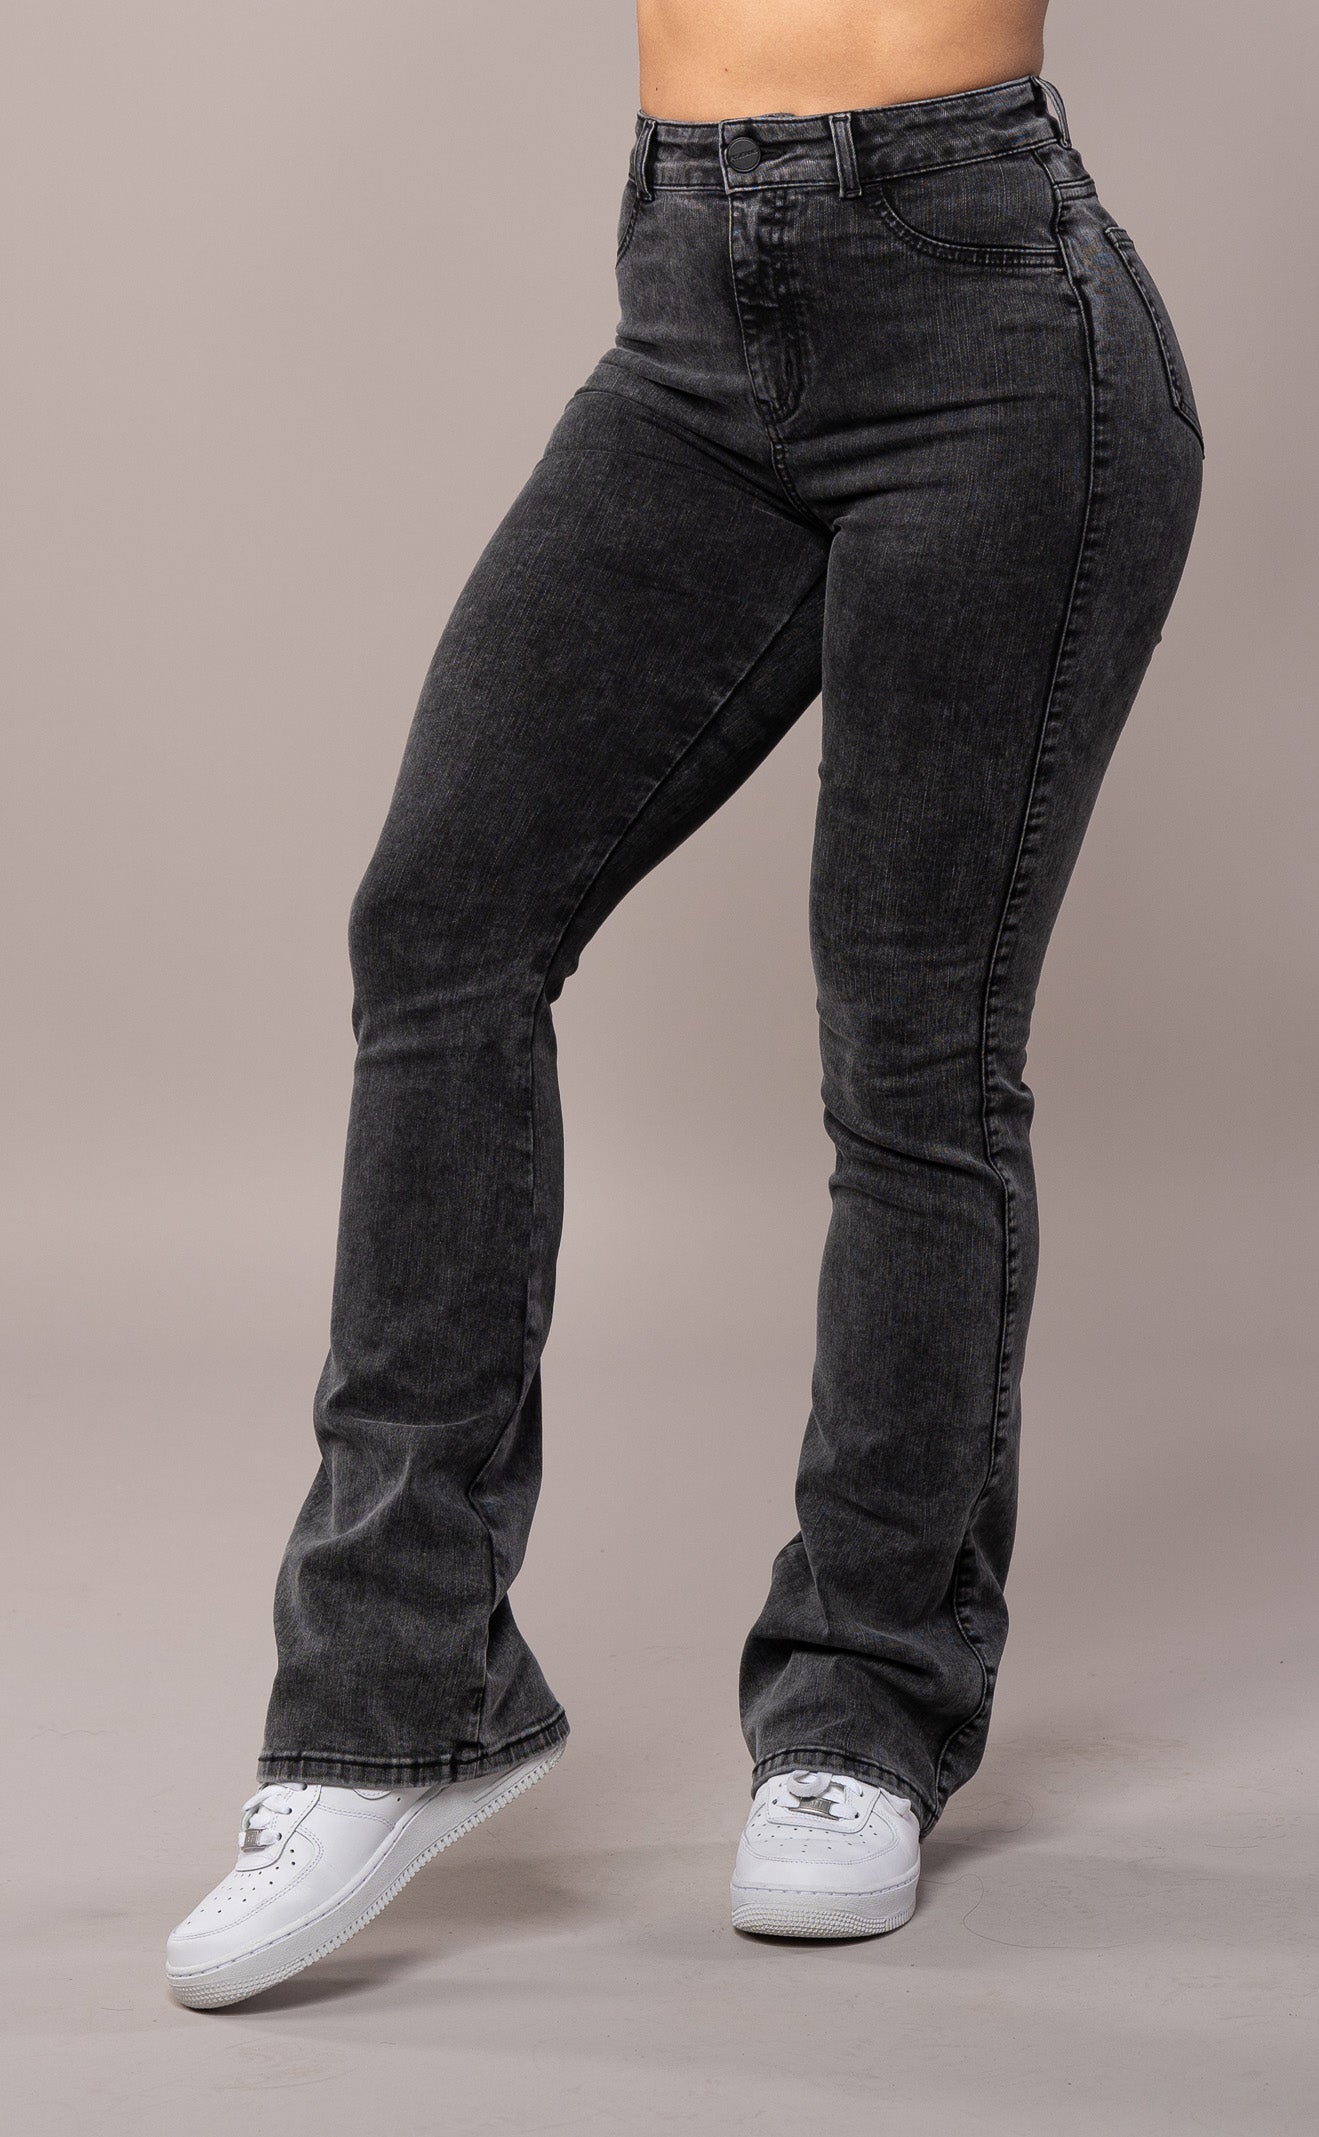 Womens Flared Fitjeans - Heavy Washed Black Flared FITJEANS   